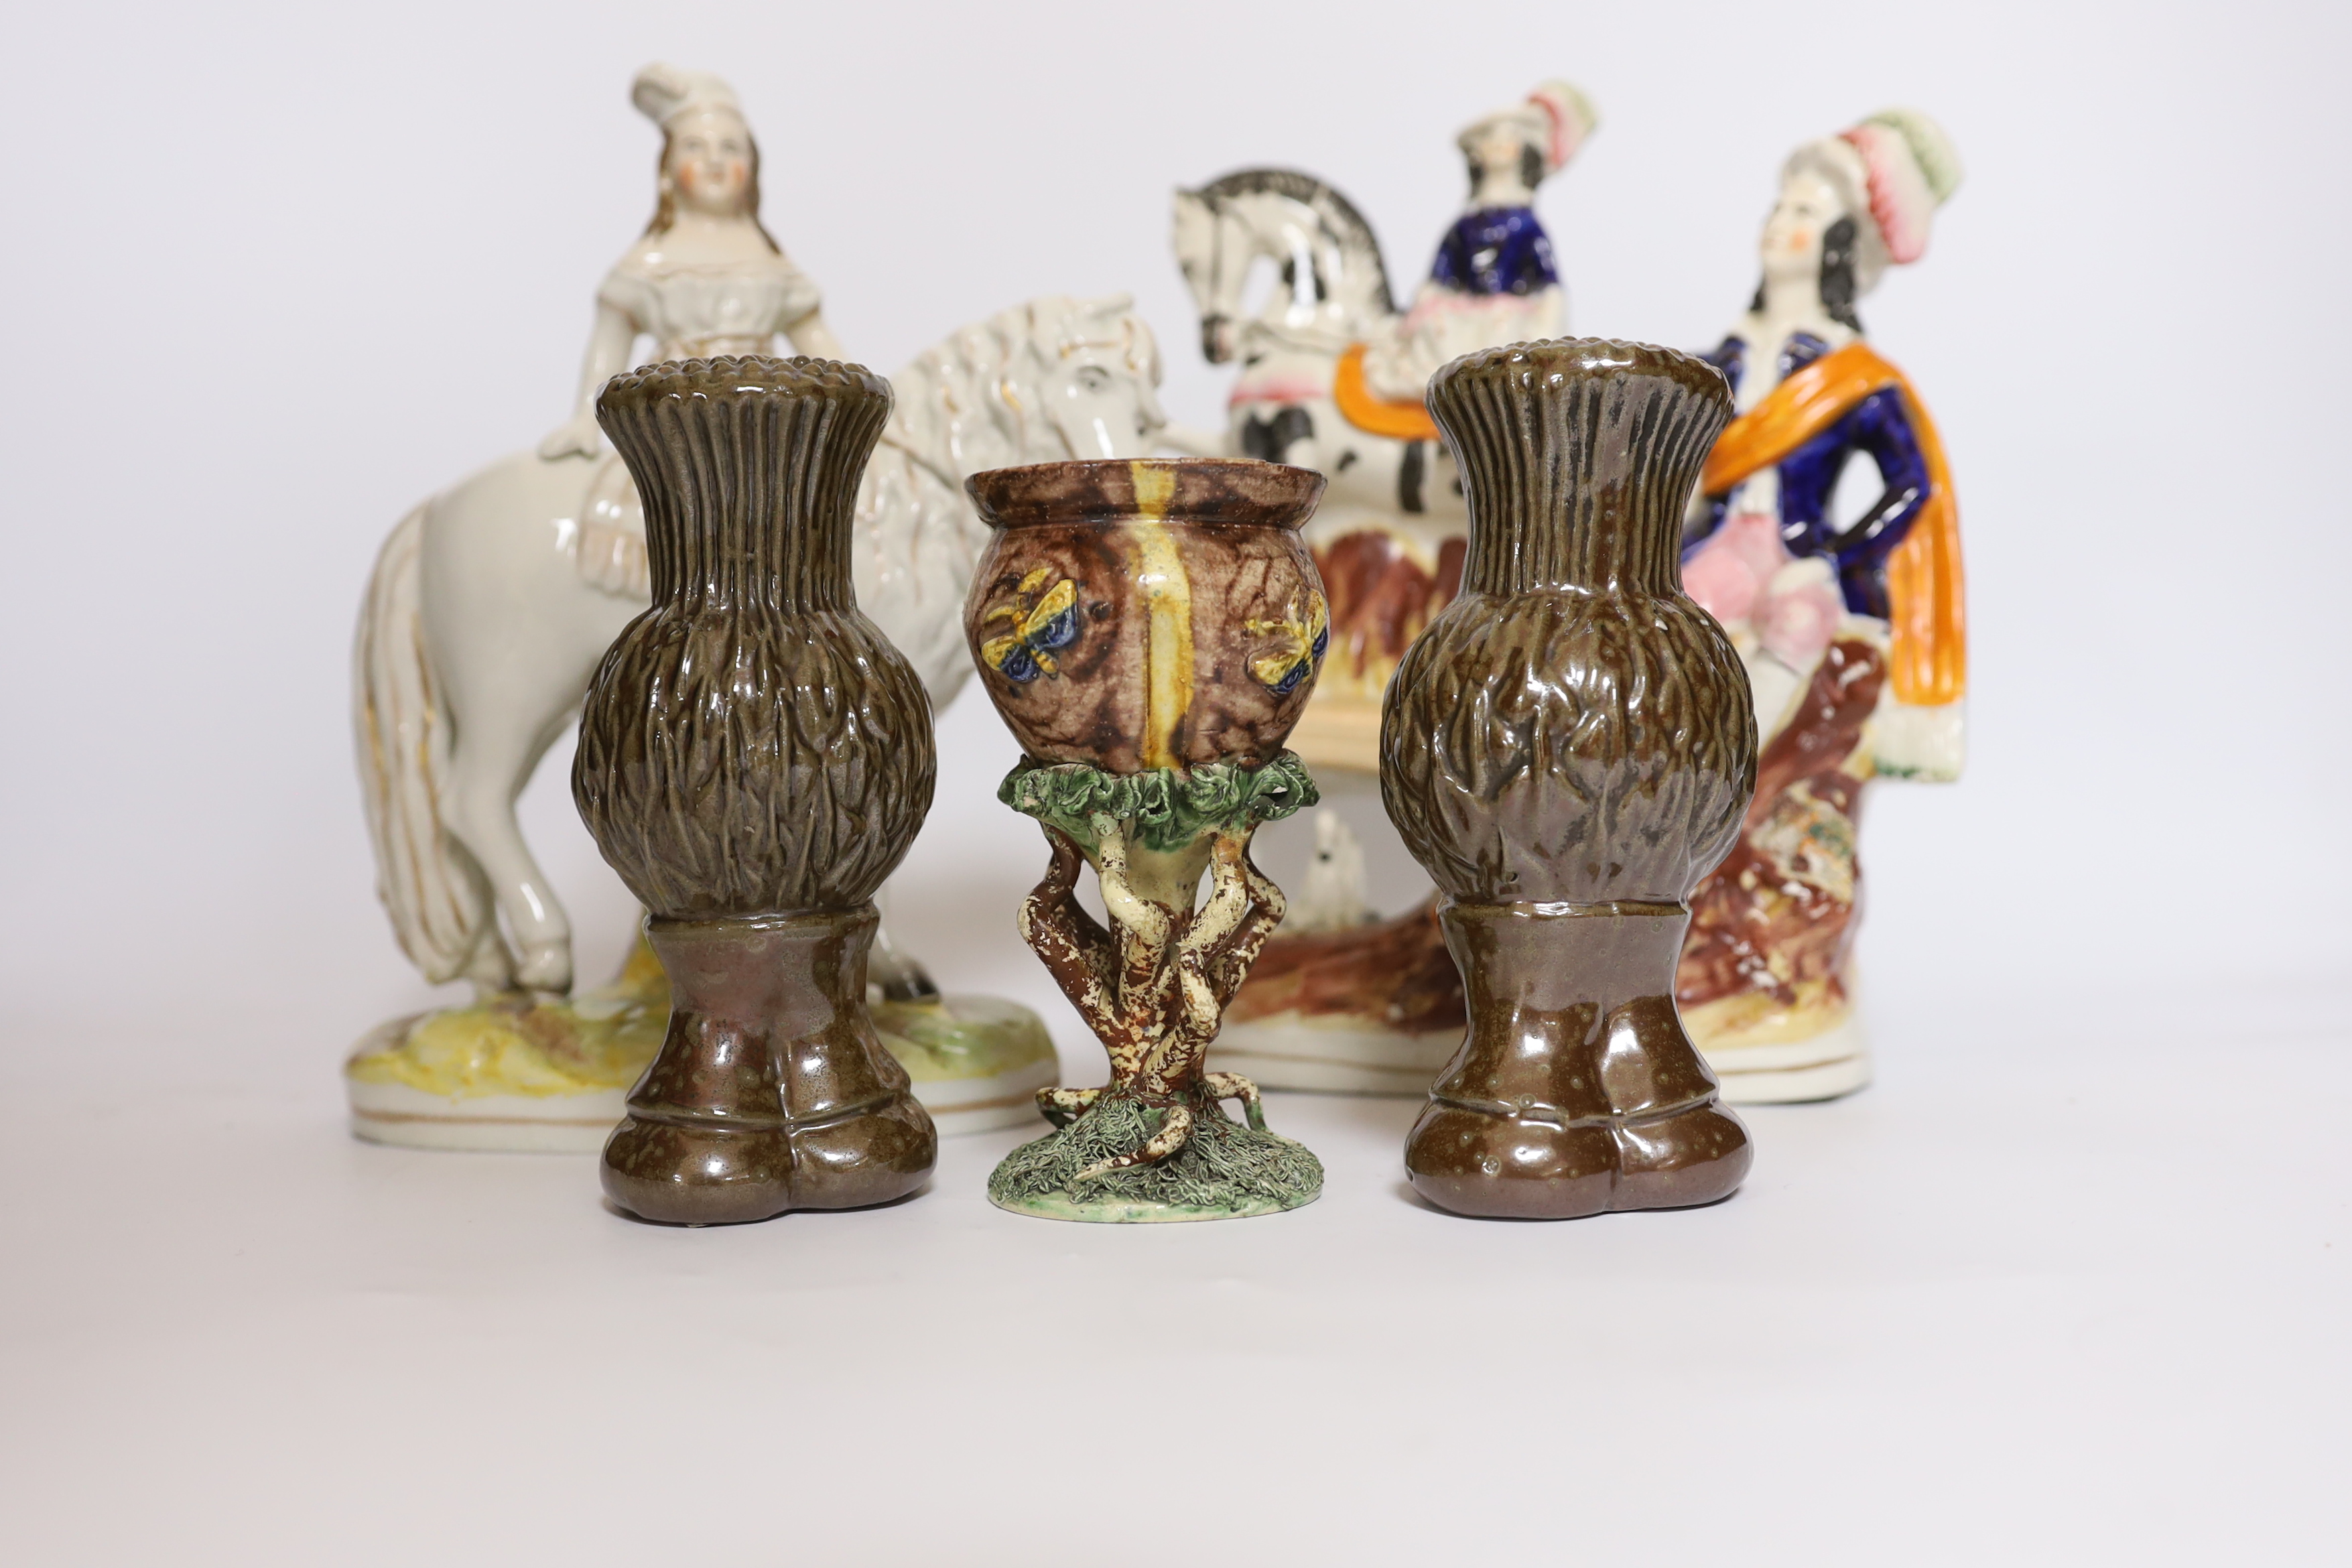 A rare Staffordshire horse group, a Princess Royal and pony group, a Palissy ware vase and a pair of - Image 2 of 4